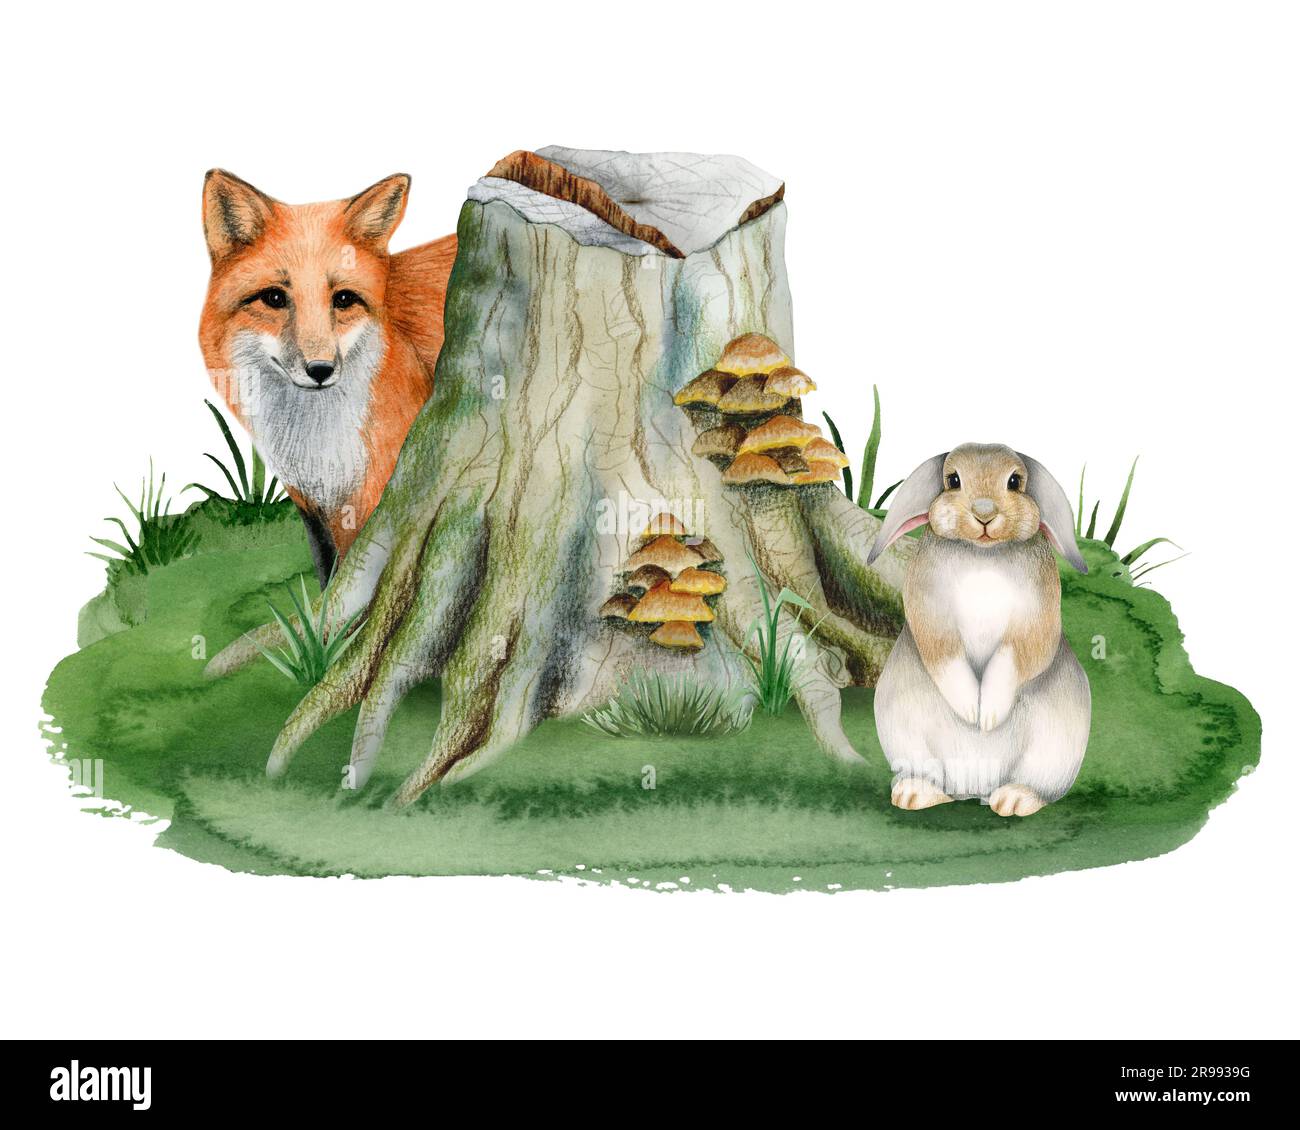 Red fox hiding behind tree stump with mushrooms and bunny rabbit sitting on green grass. Watercolor forest animals Stock Photo